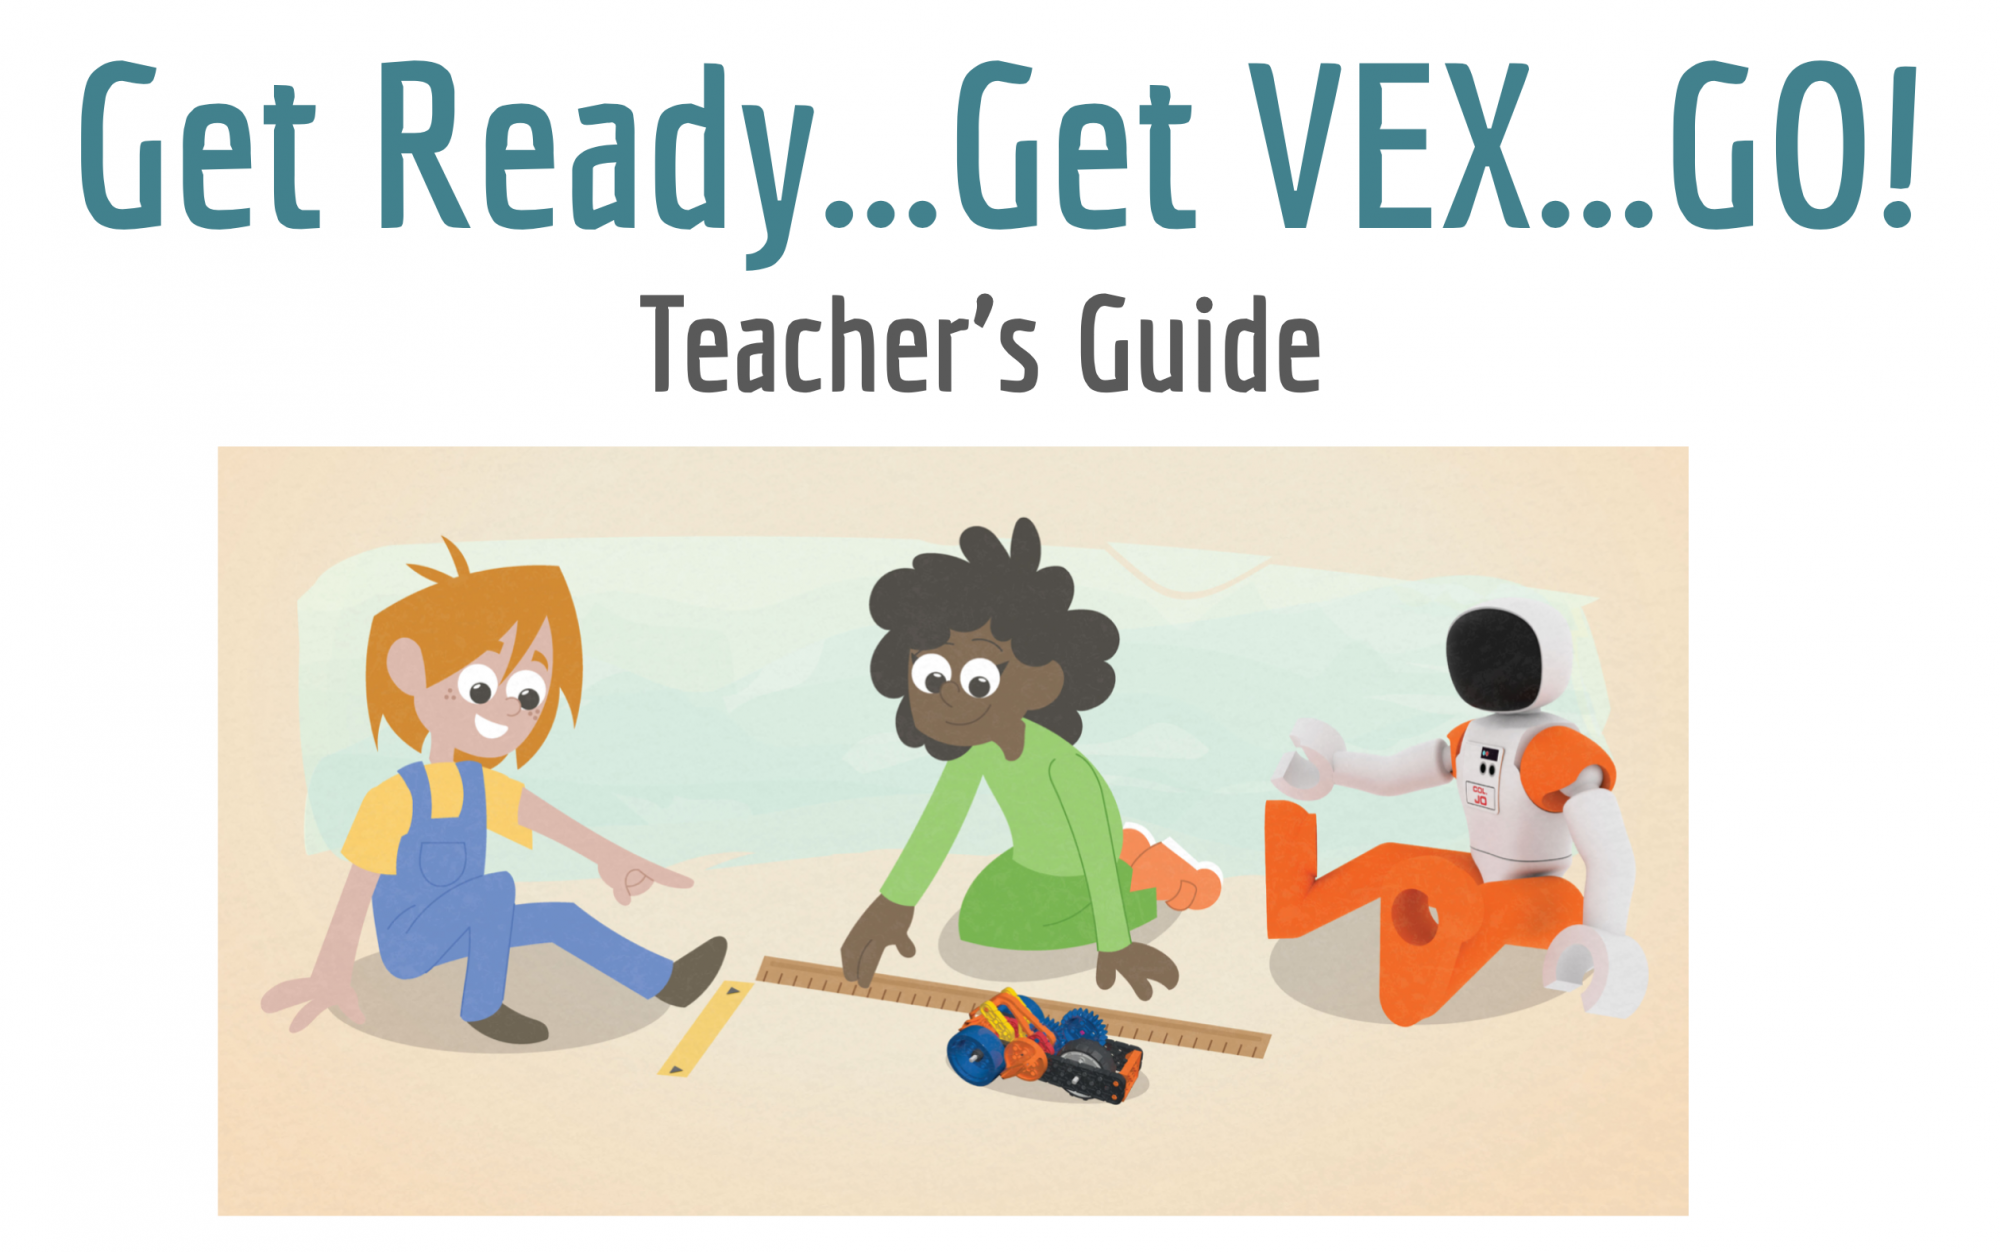 Image of the cover slide of Get Ready, Get VEX, GO! Teacher's Guide